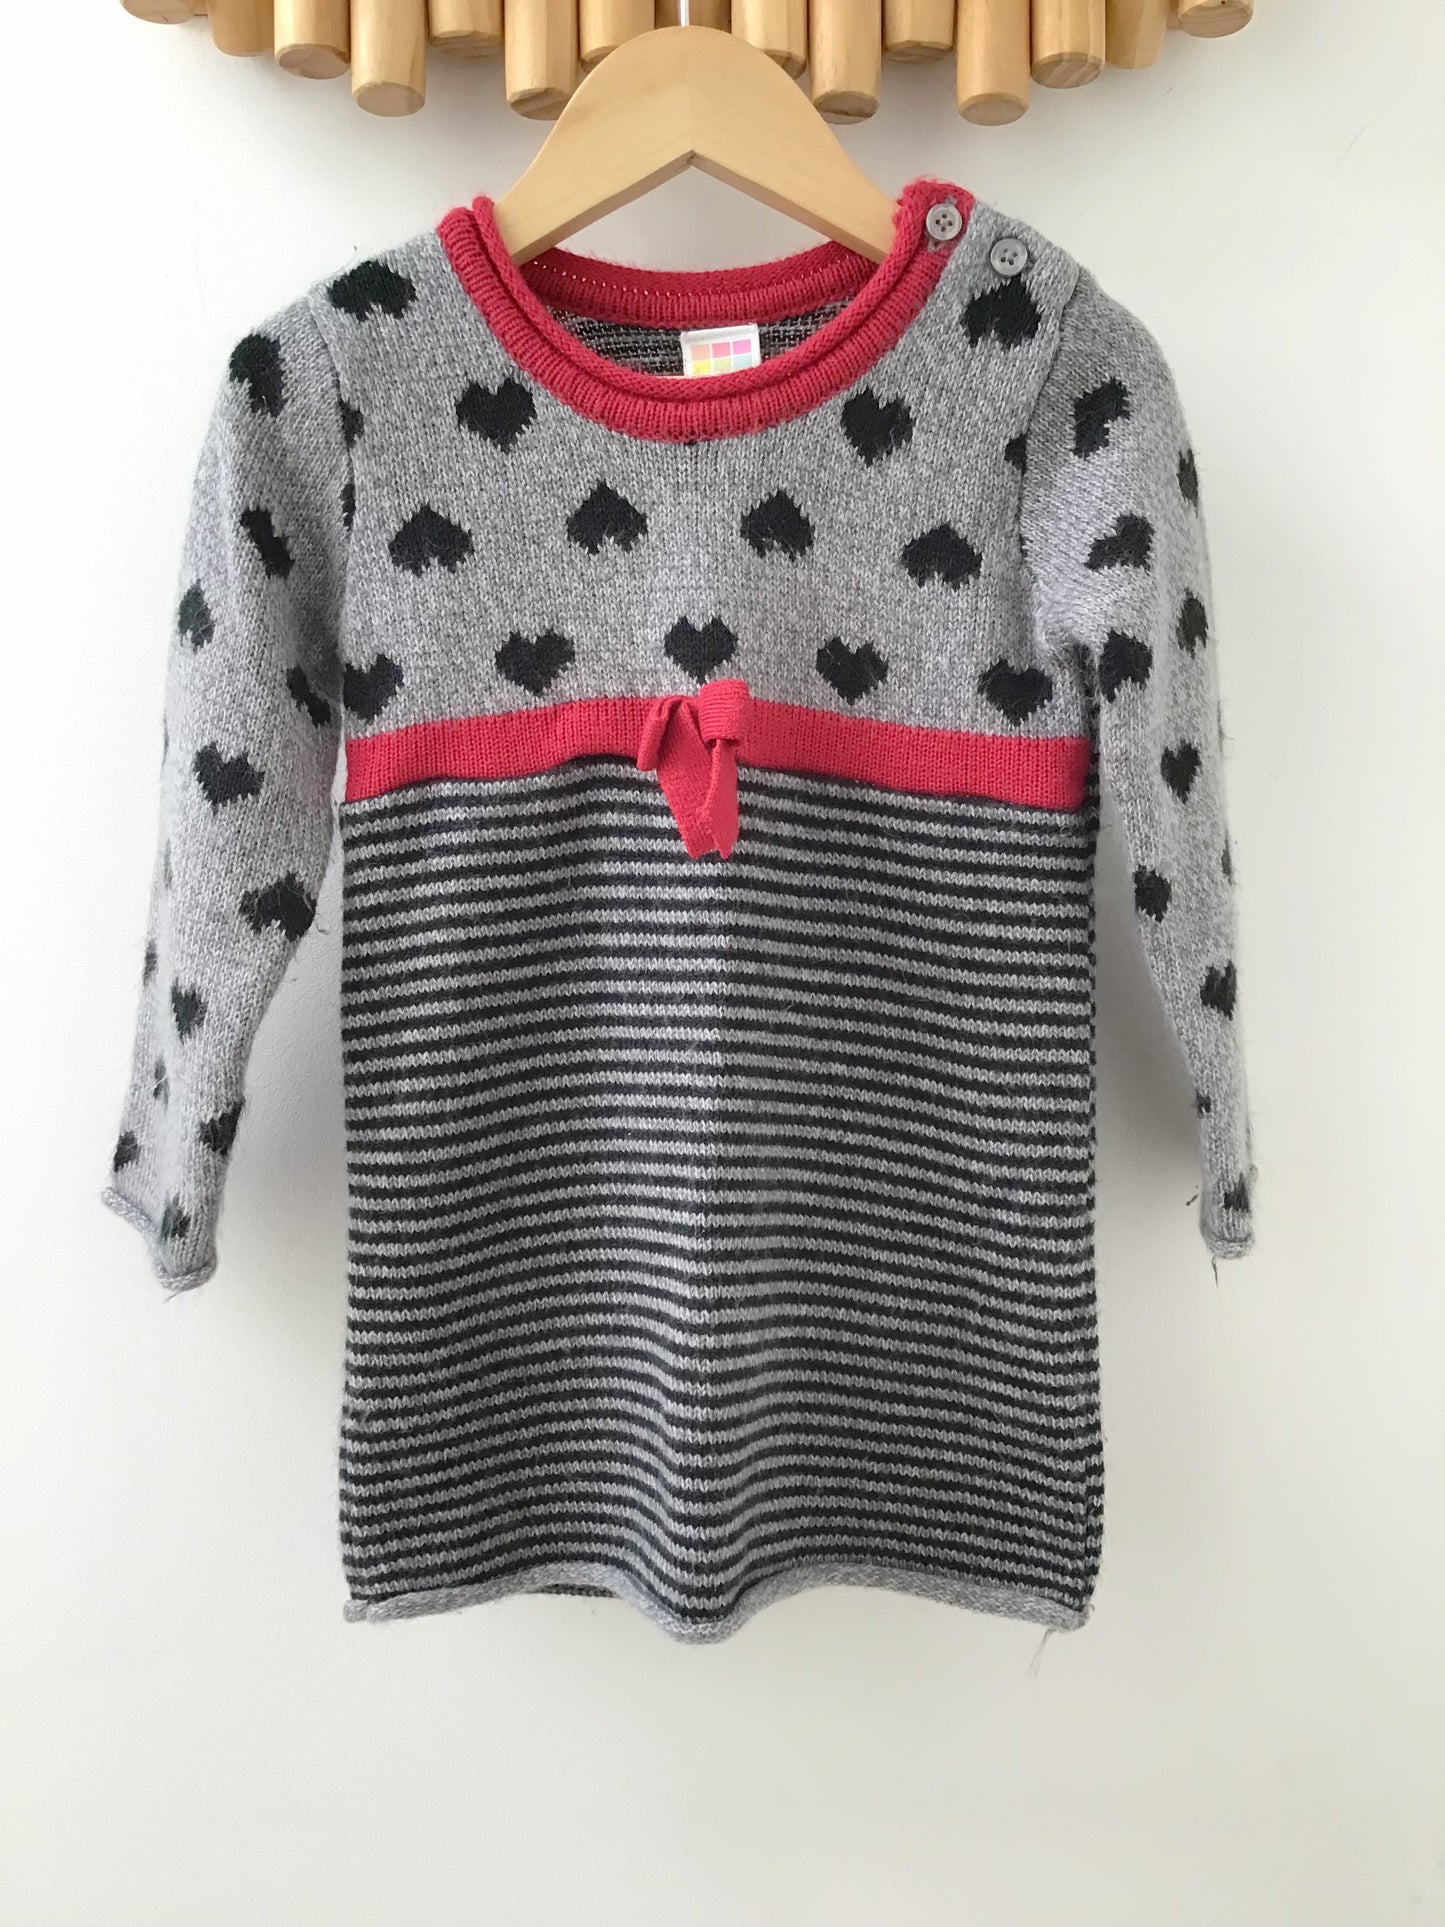 Red and grey hearts knit sweater dress 24m